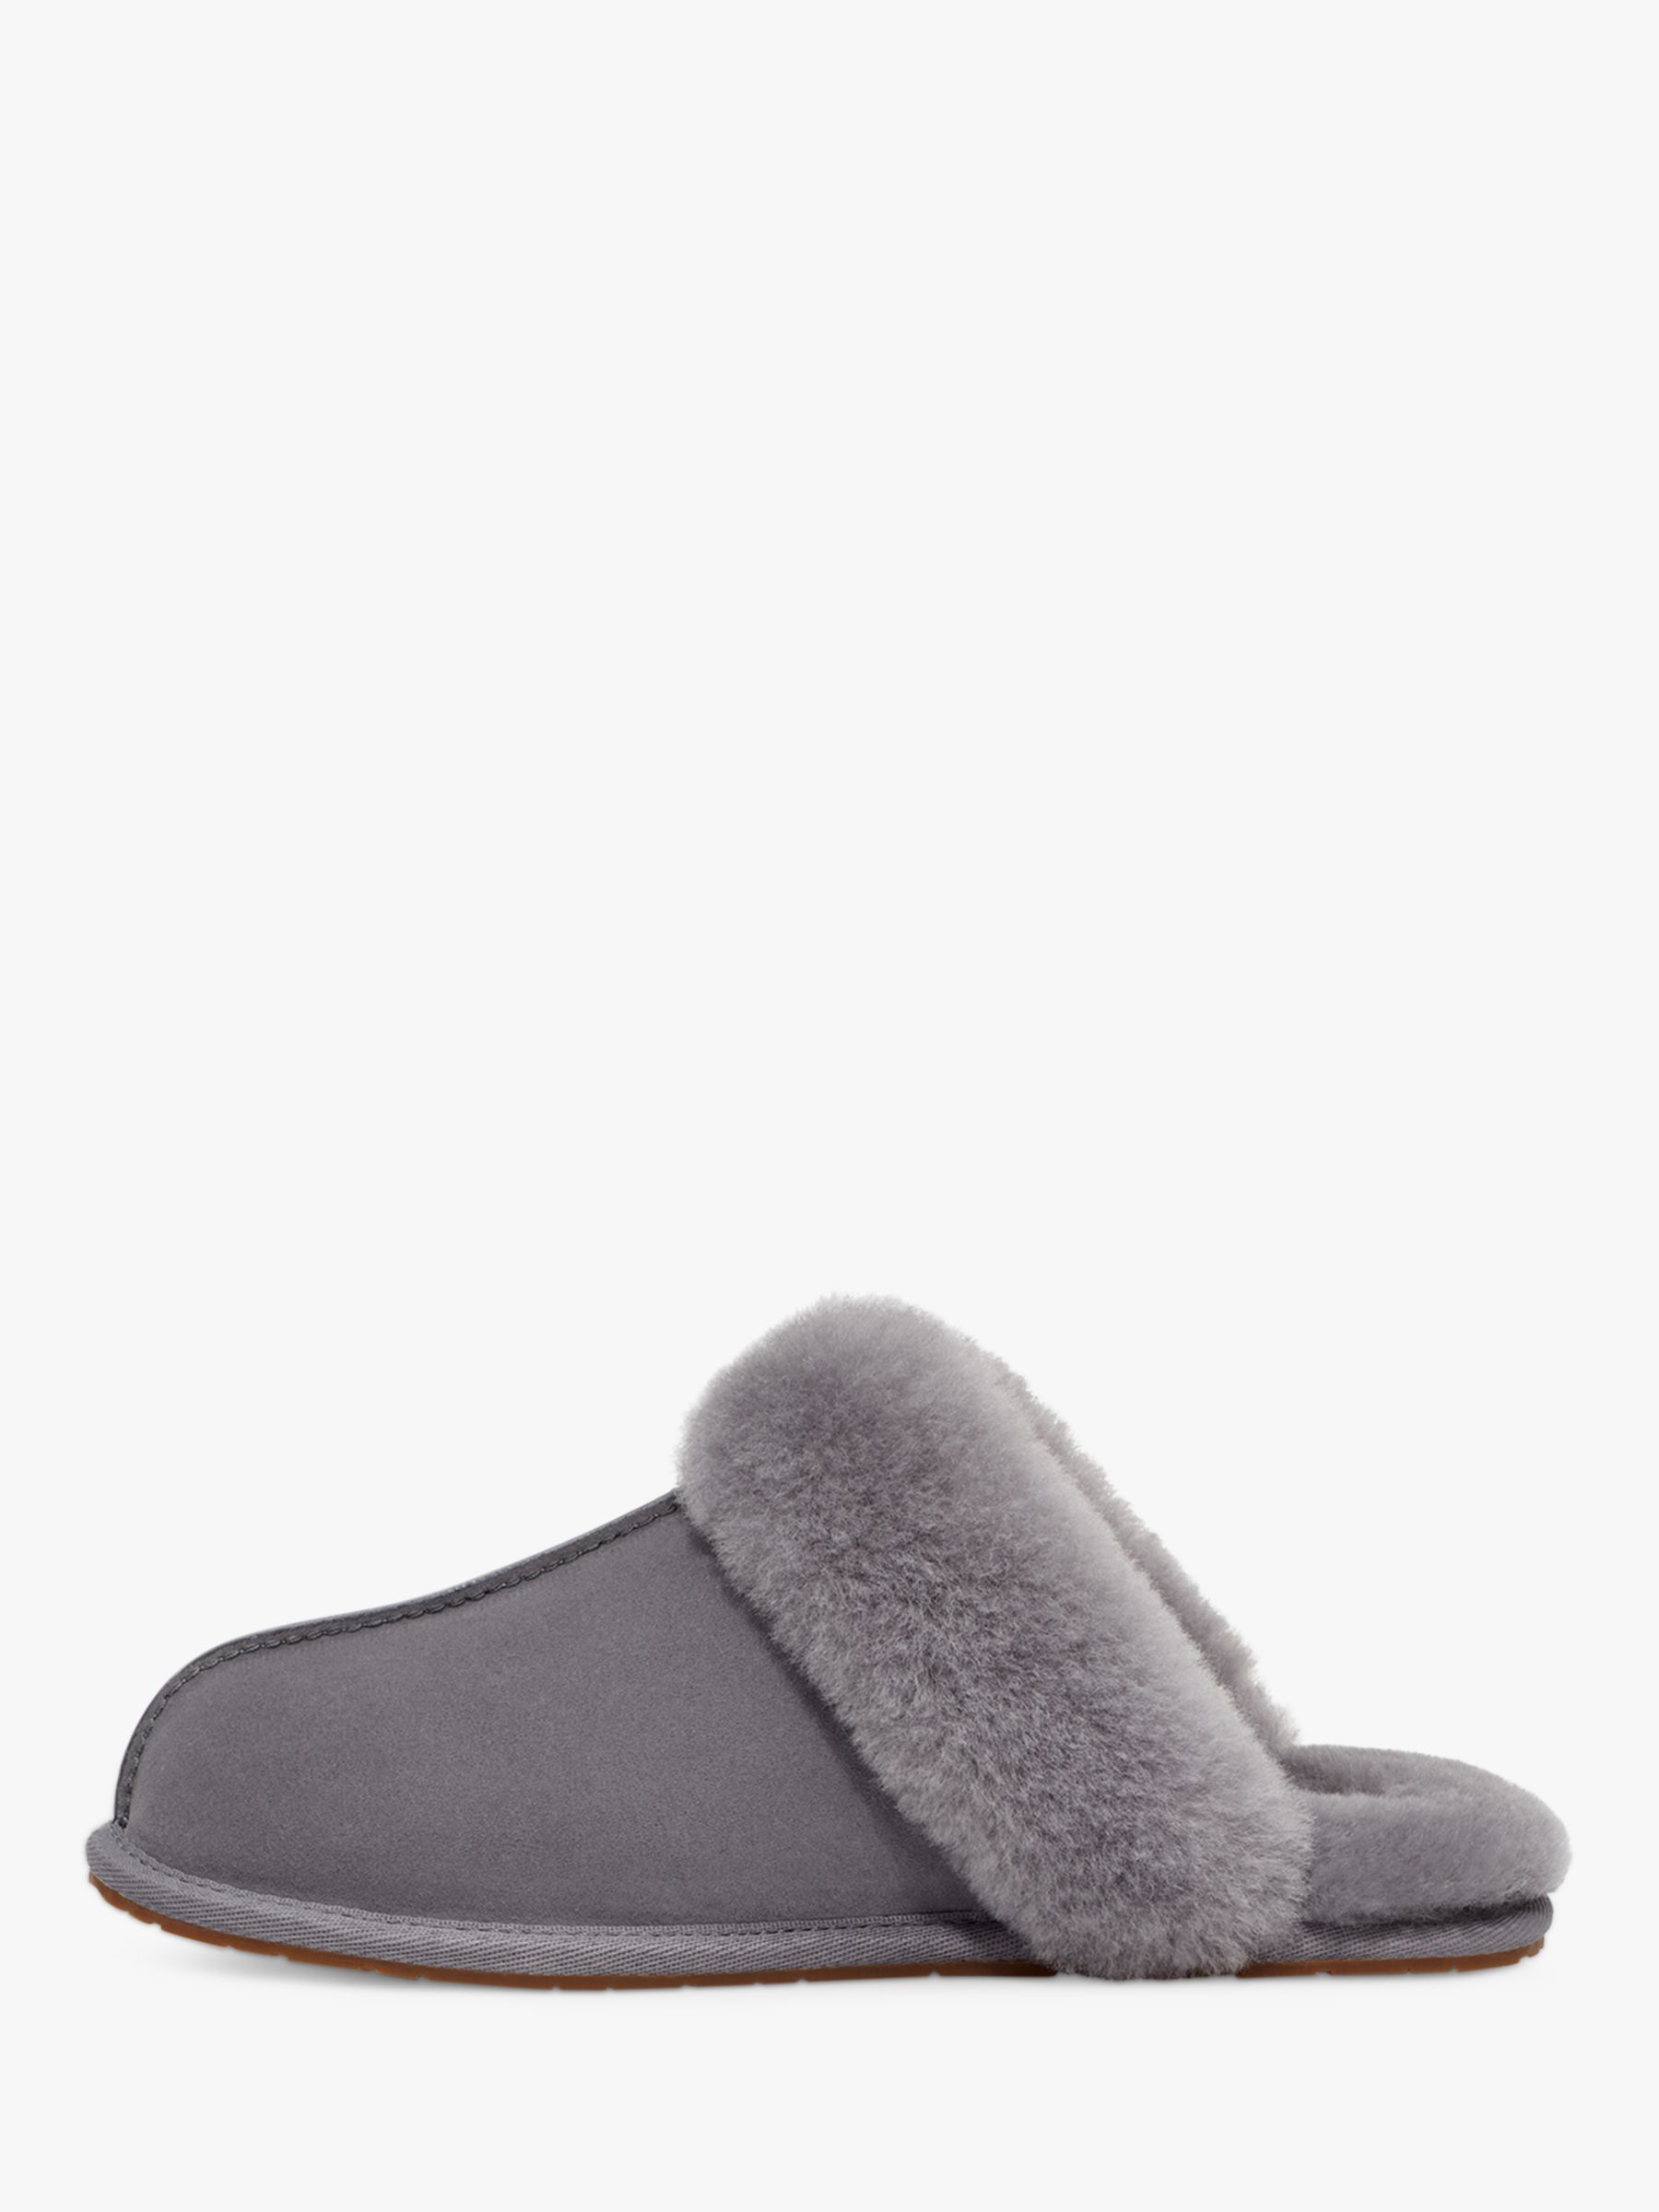 UGG Scuffette Sheepskin and Suede Slippers, Lighthouse at John Lewis ...